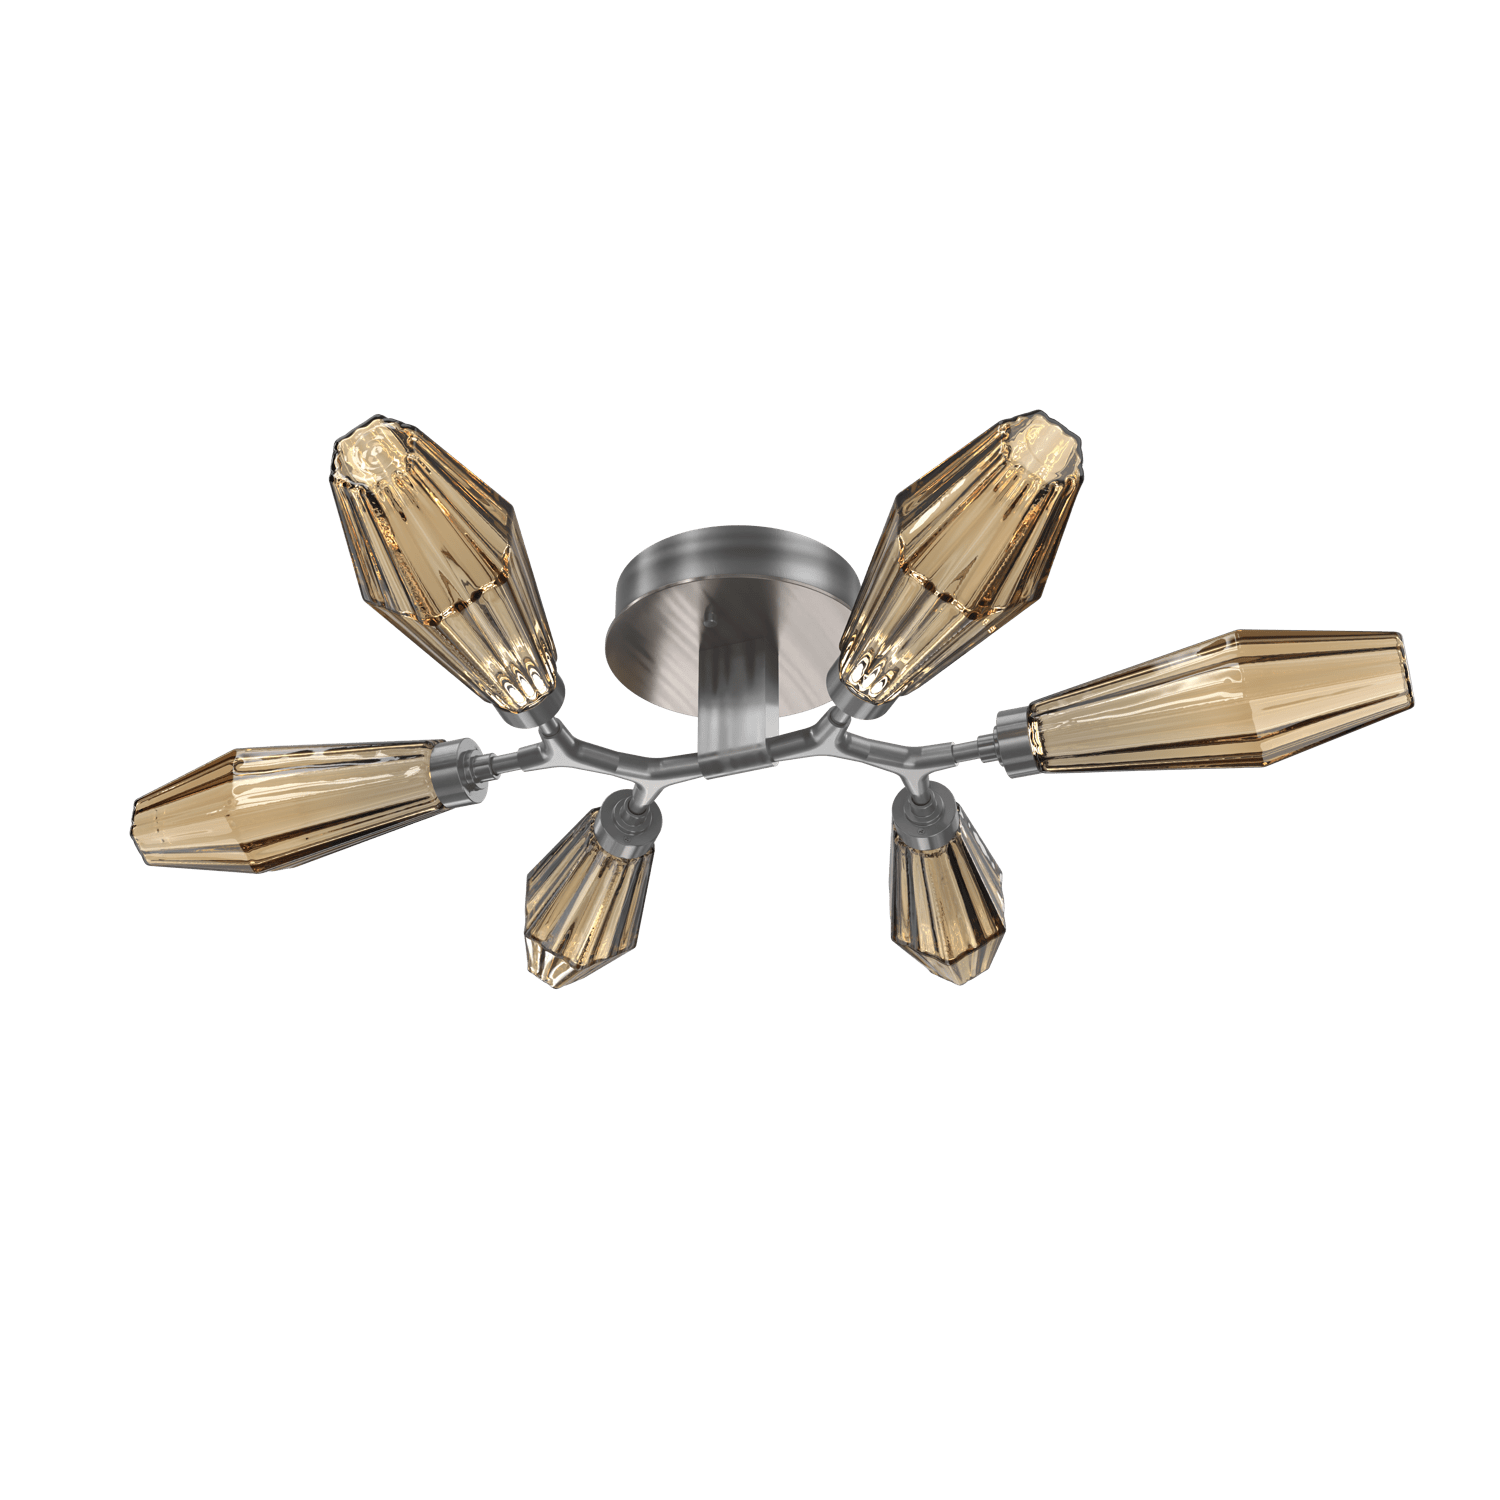 CLB0049-01-GM-RB-Hammerton-Studio-Aalto-6-light-organic-flush-mount-light-with-gunmetal-finish-and-optic-ribbed-bronze-glass-shades-and-LED-lamping